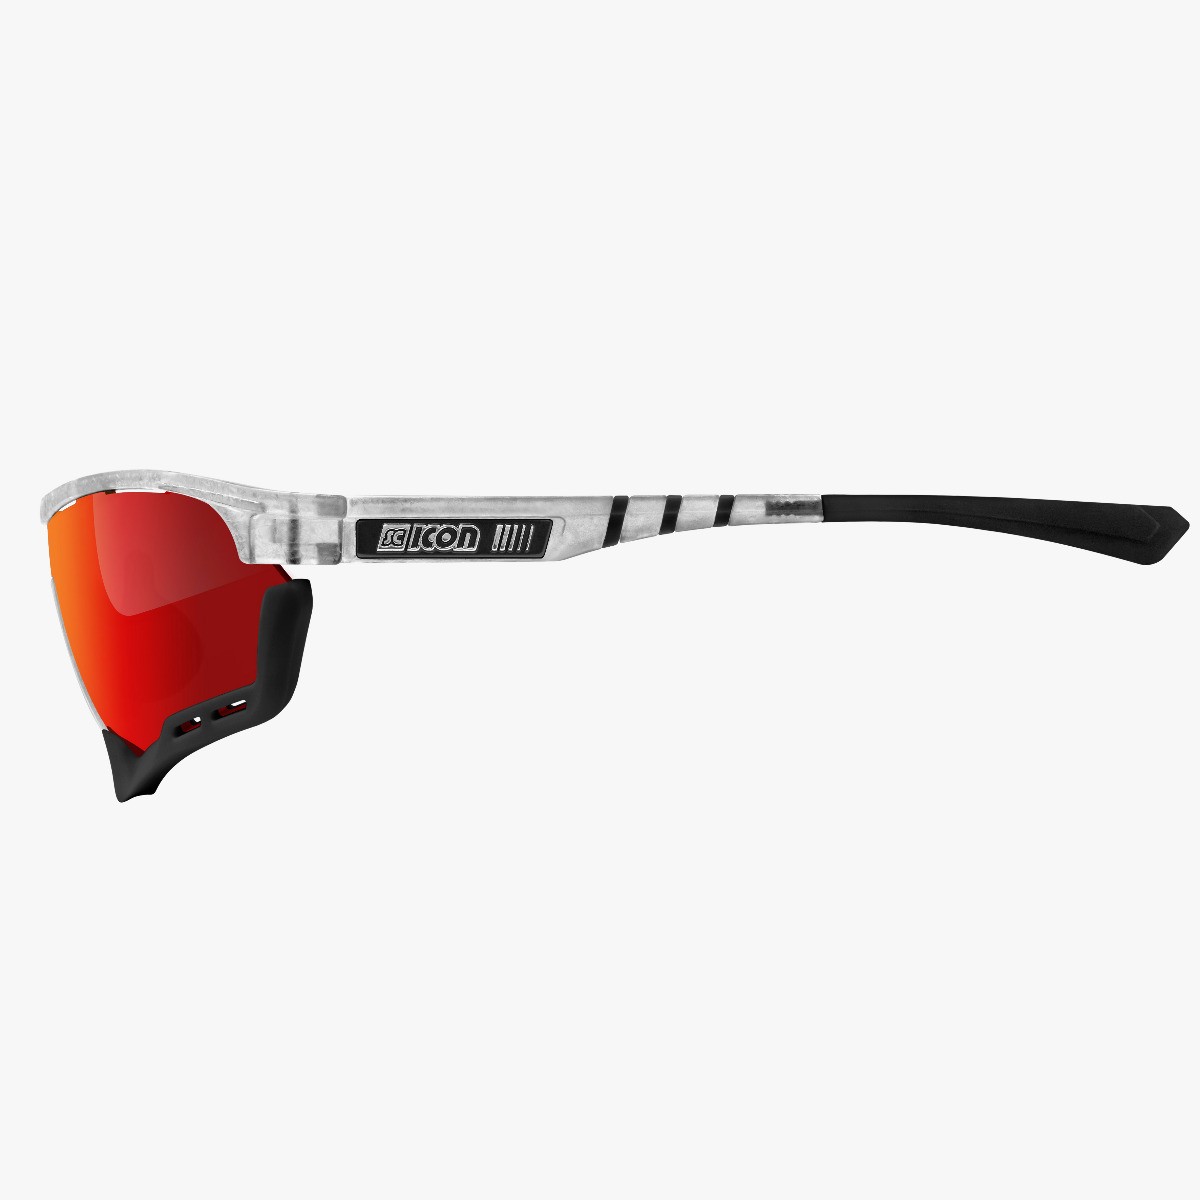 Scicon Sports | Aerotech Sport Cycling Performance Sunglasses - Frozen White / Red - EY13060503
